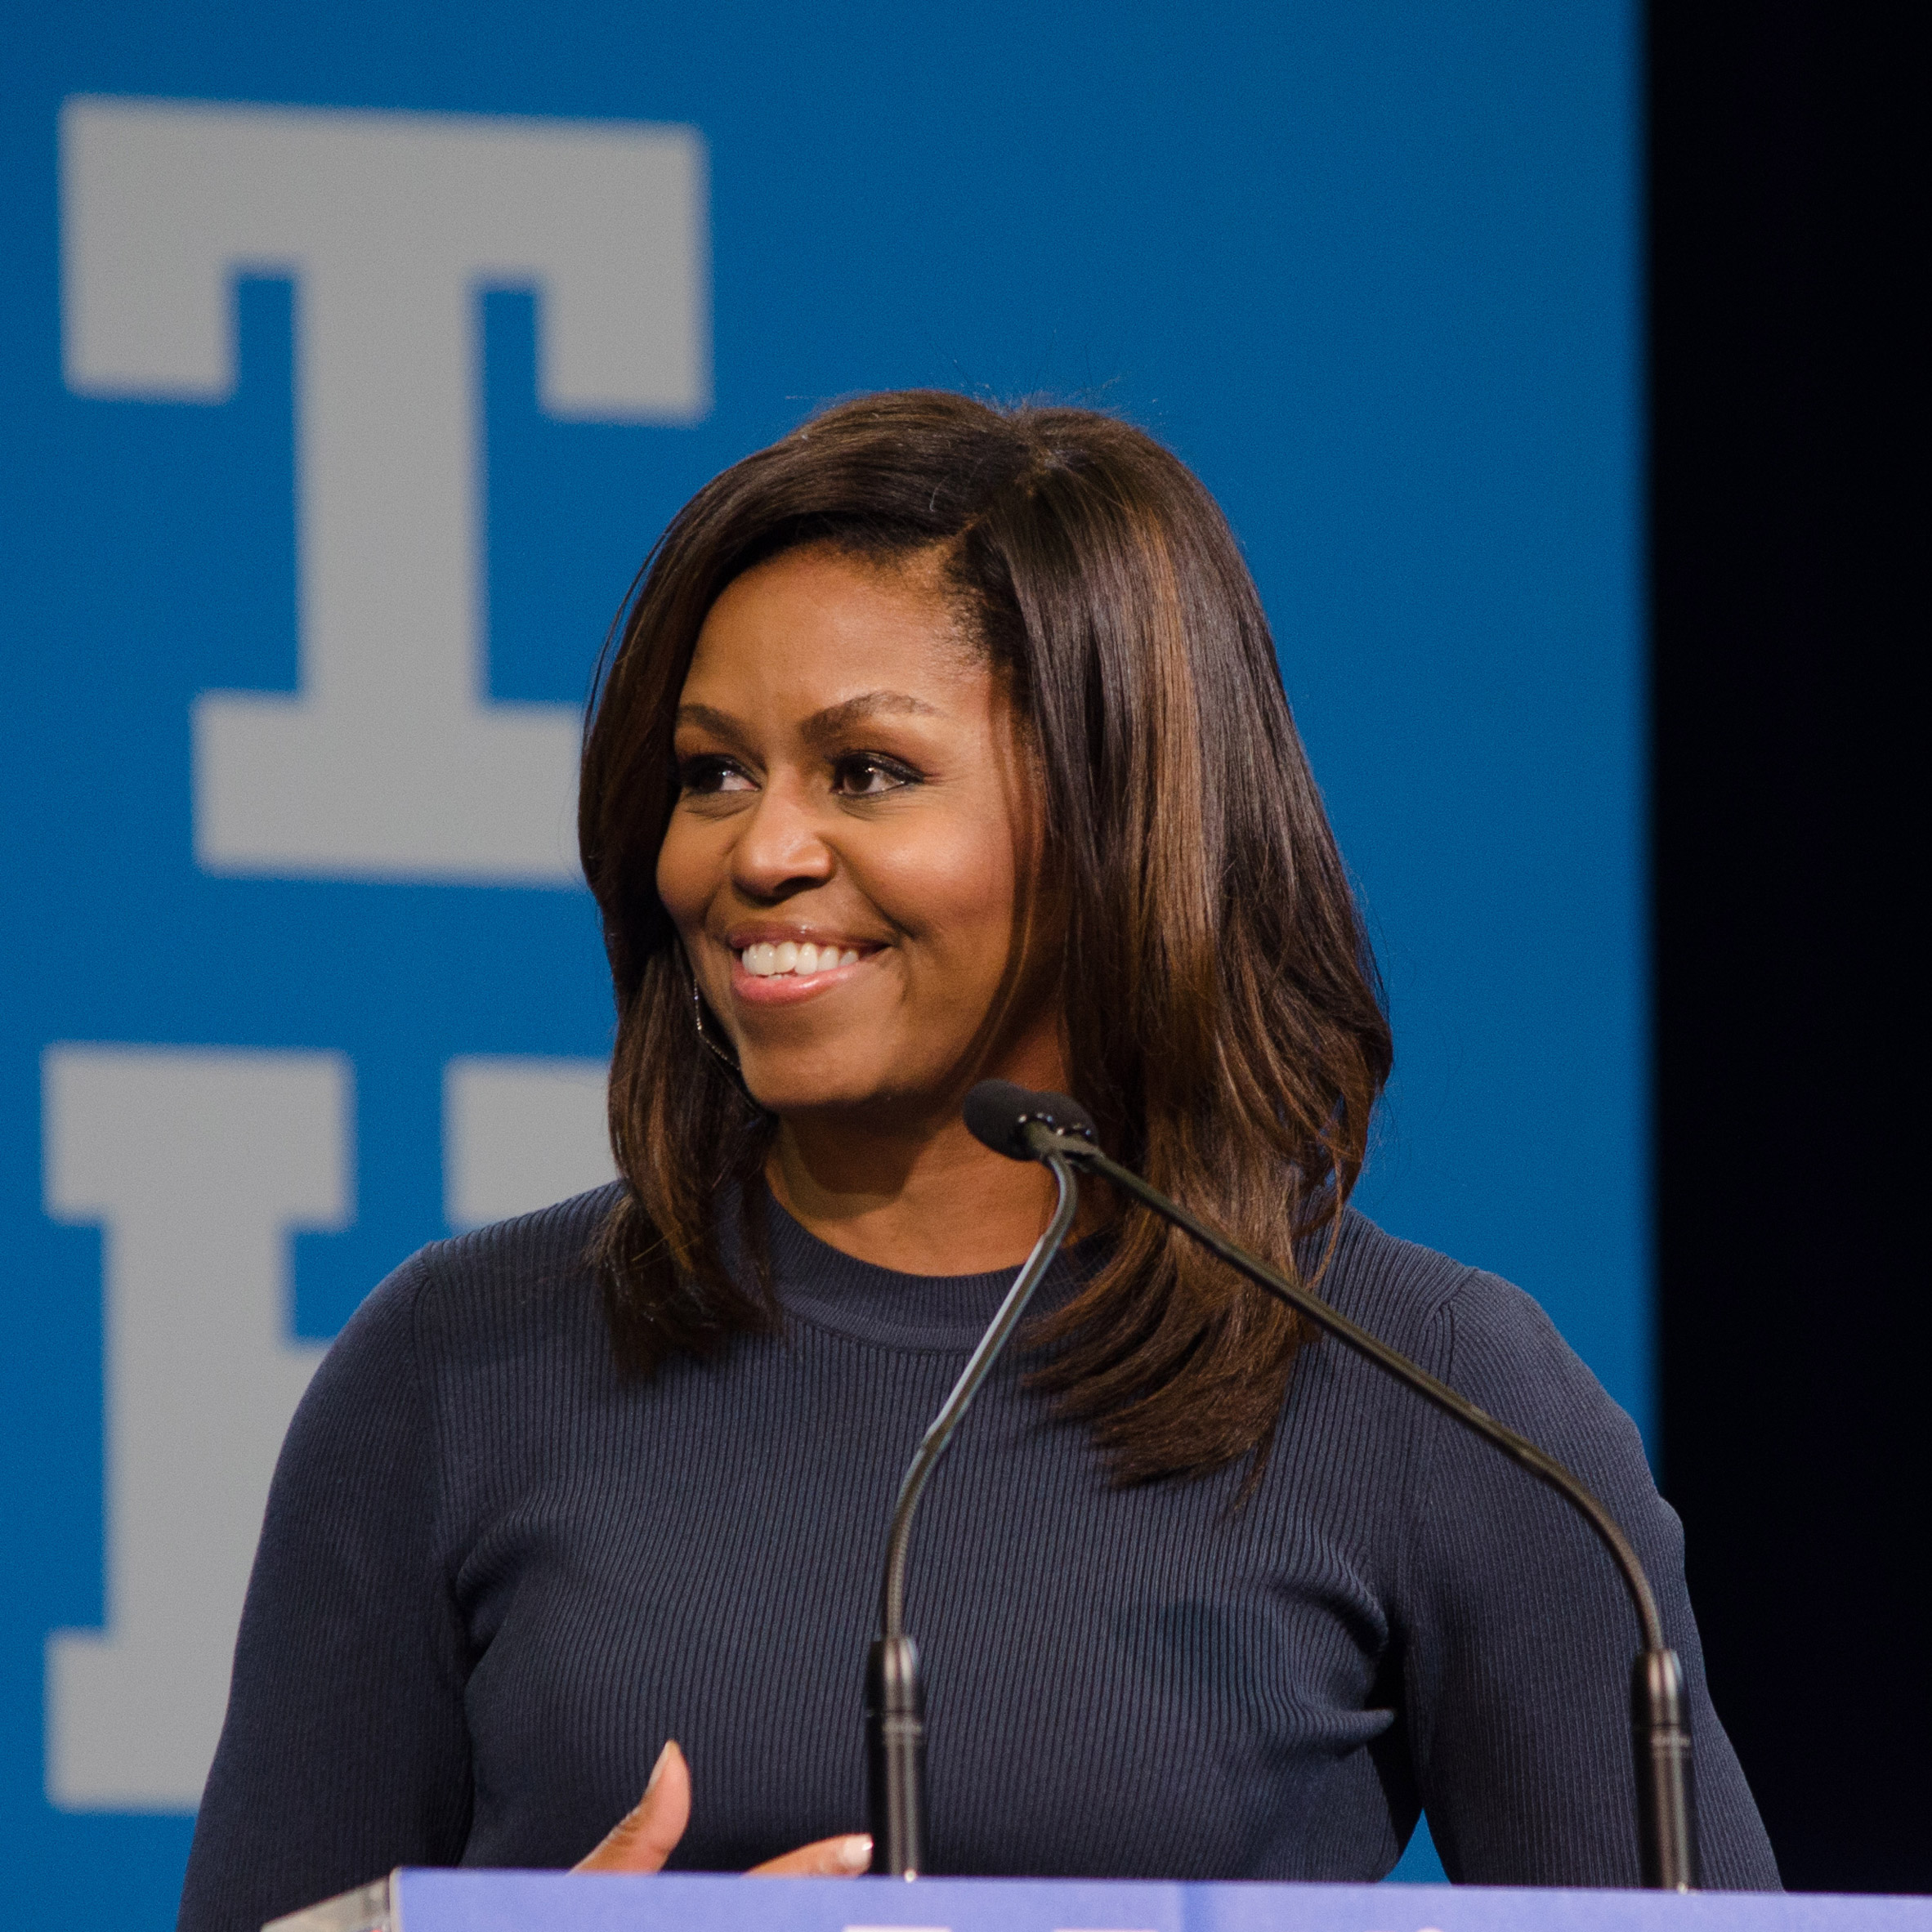 Michelle Obama announced as keynote speaker for AIA 2017 conference